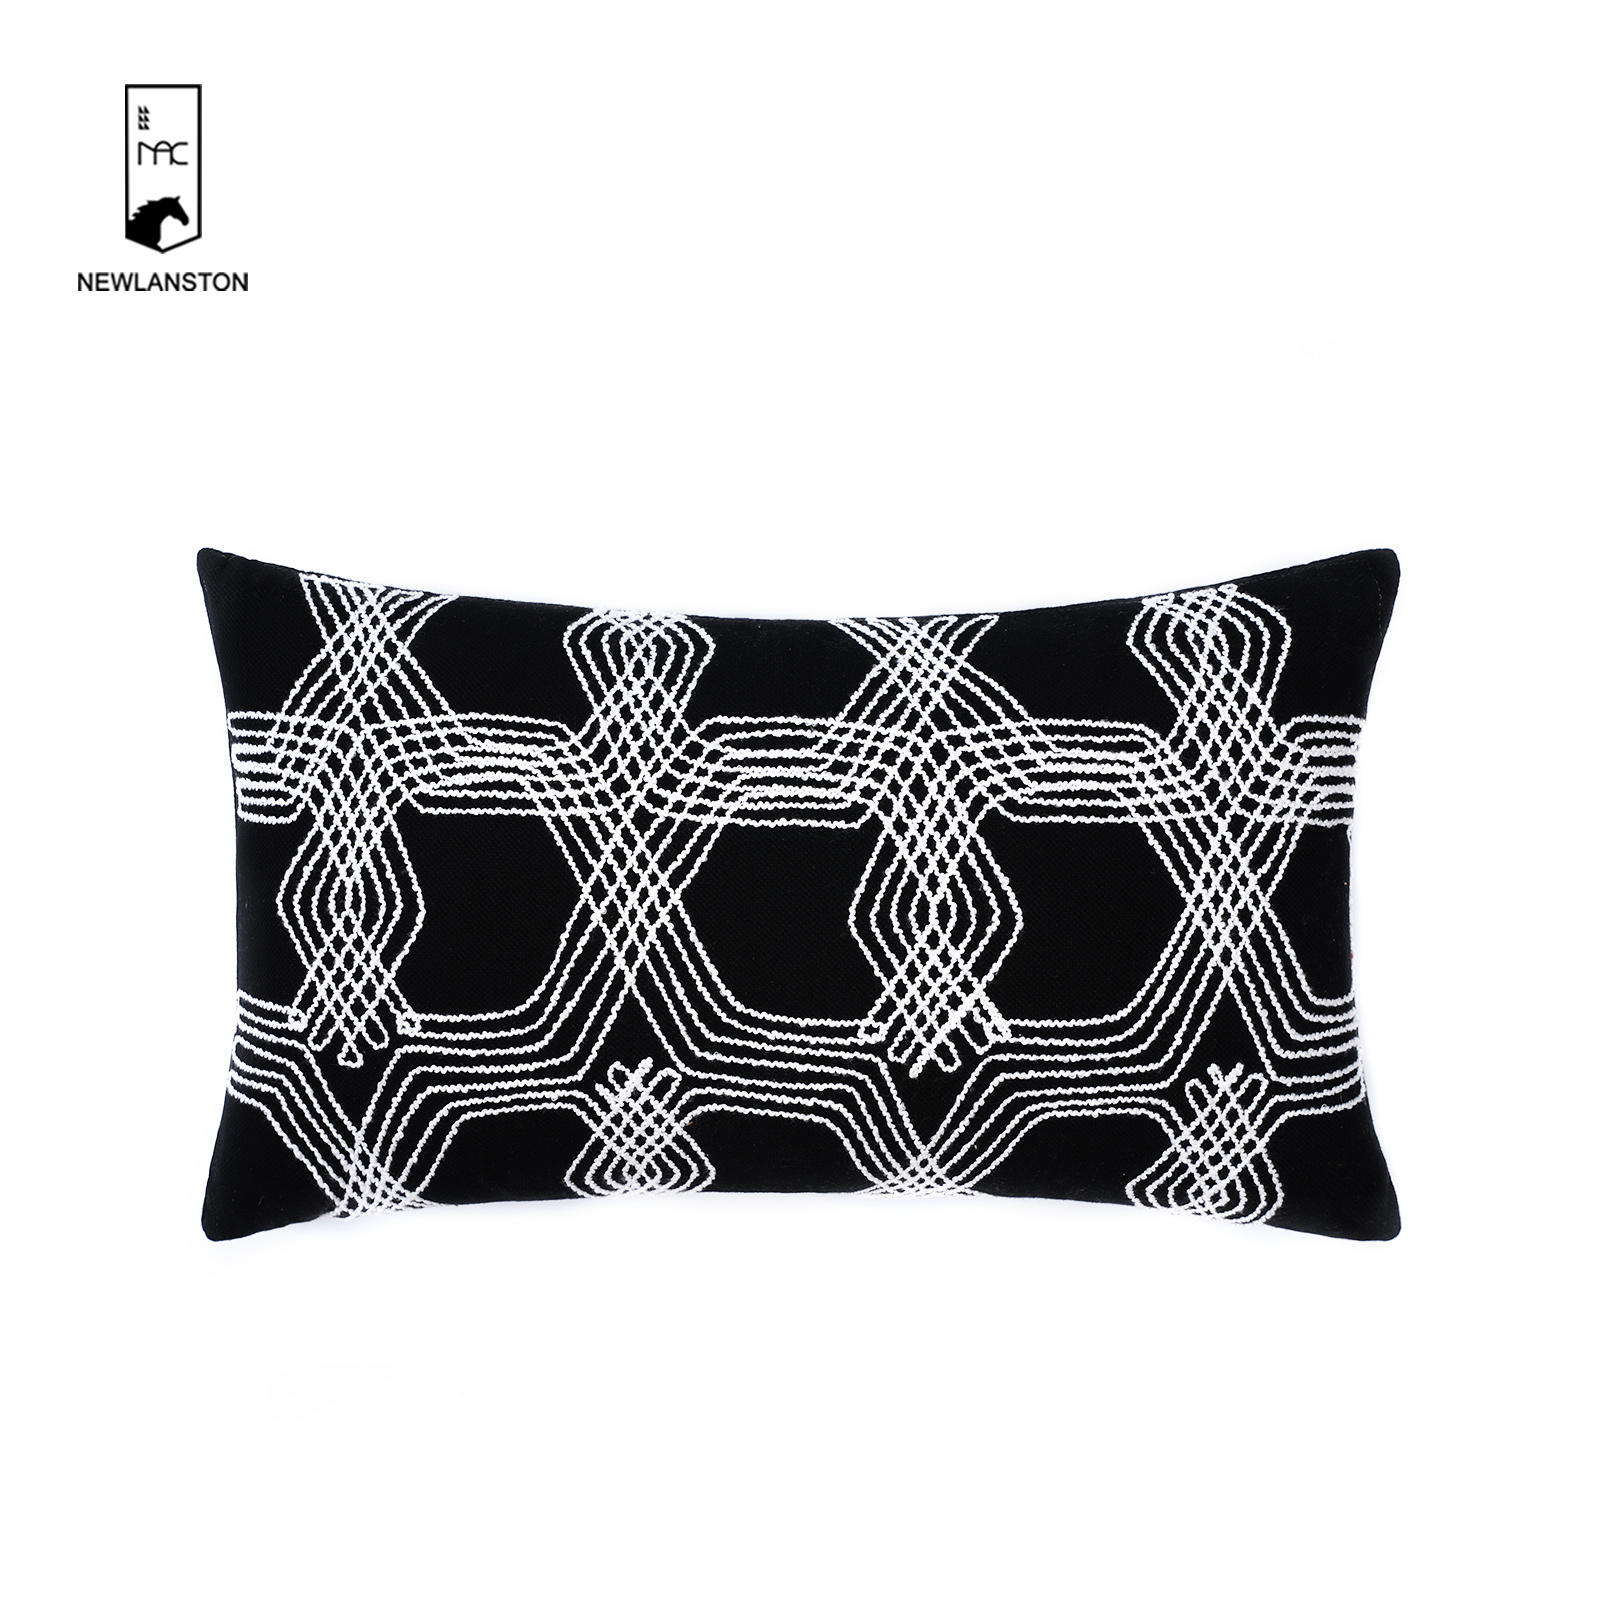 50x30 Embroidery cotton Geometric Style Cushion/Pillow cover 